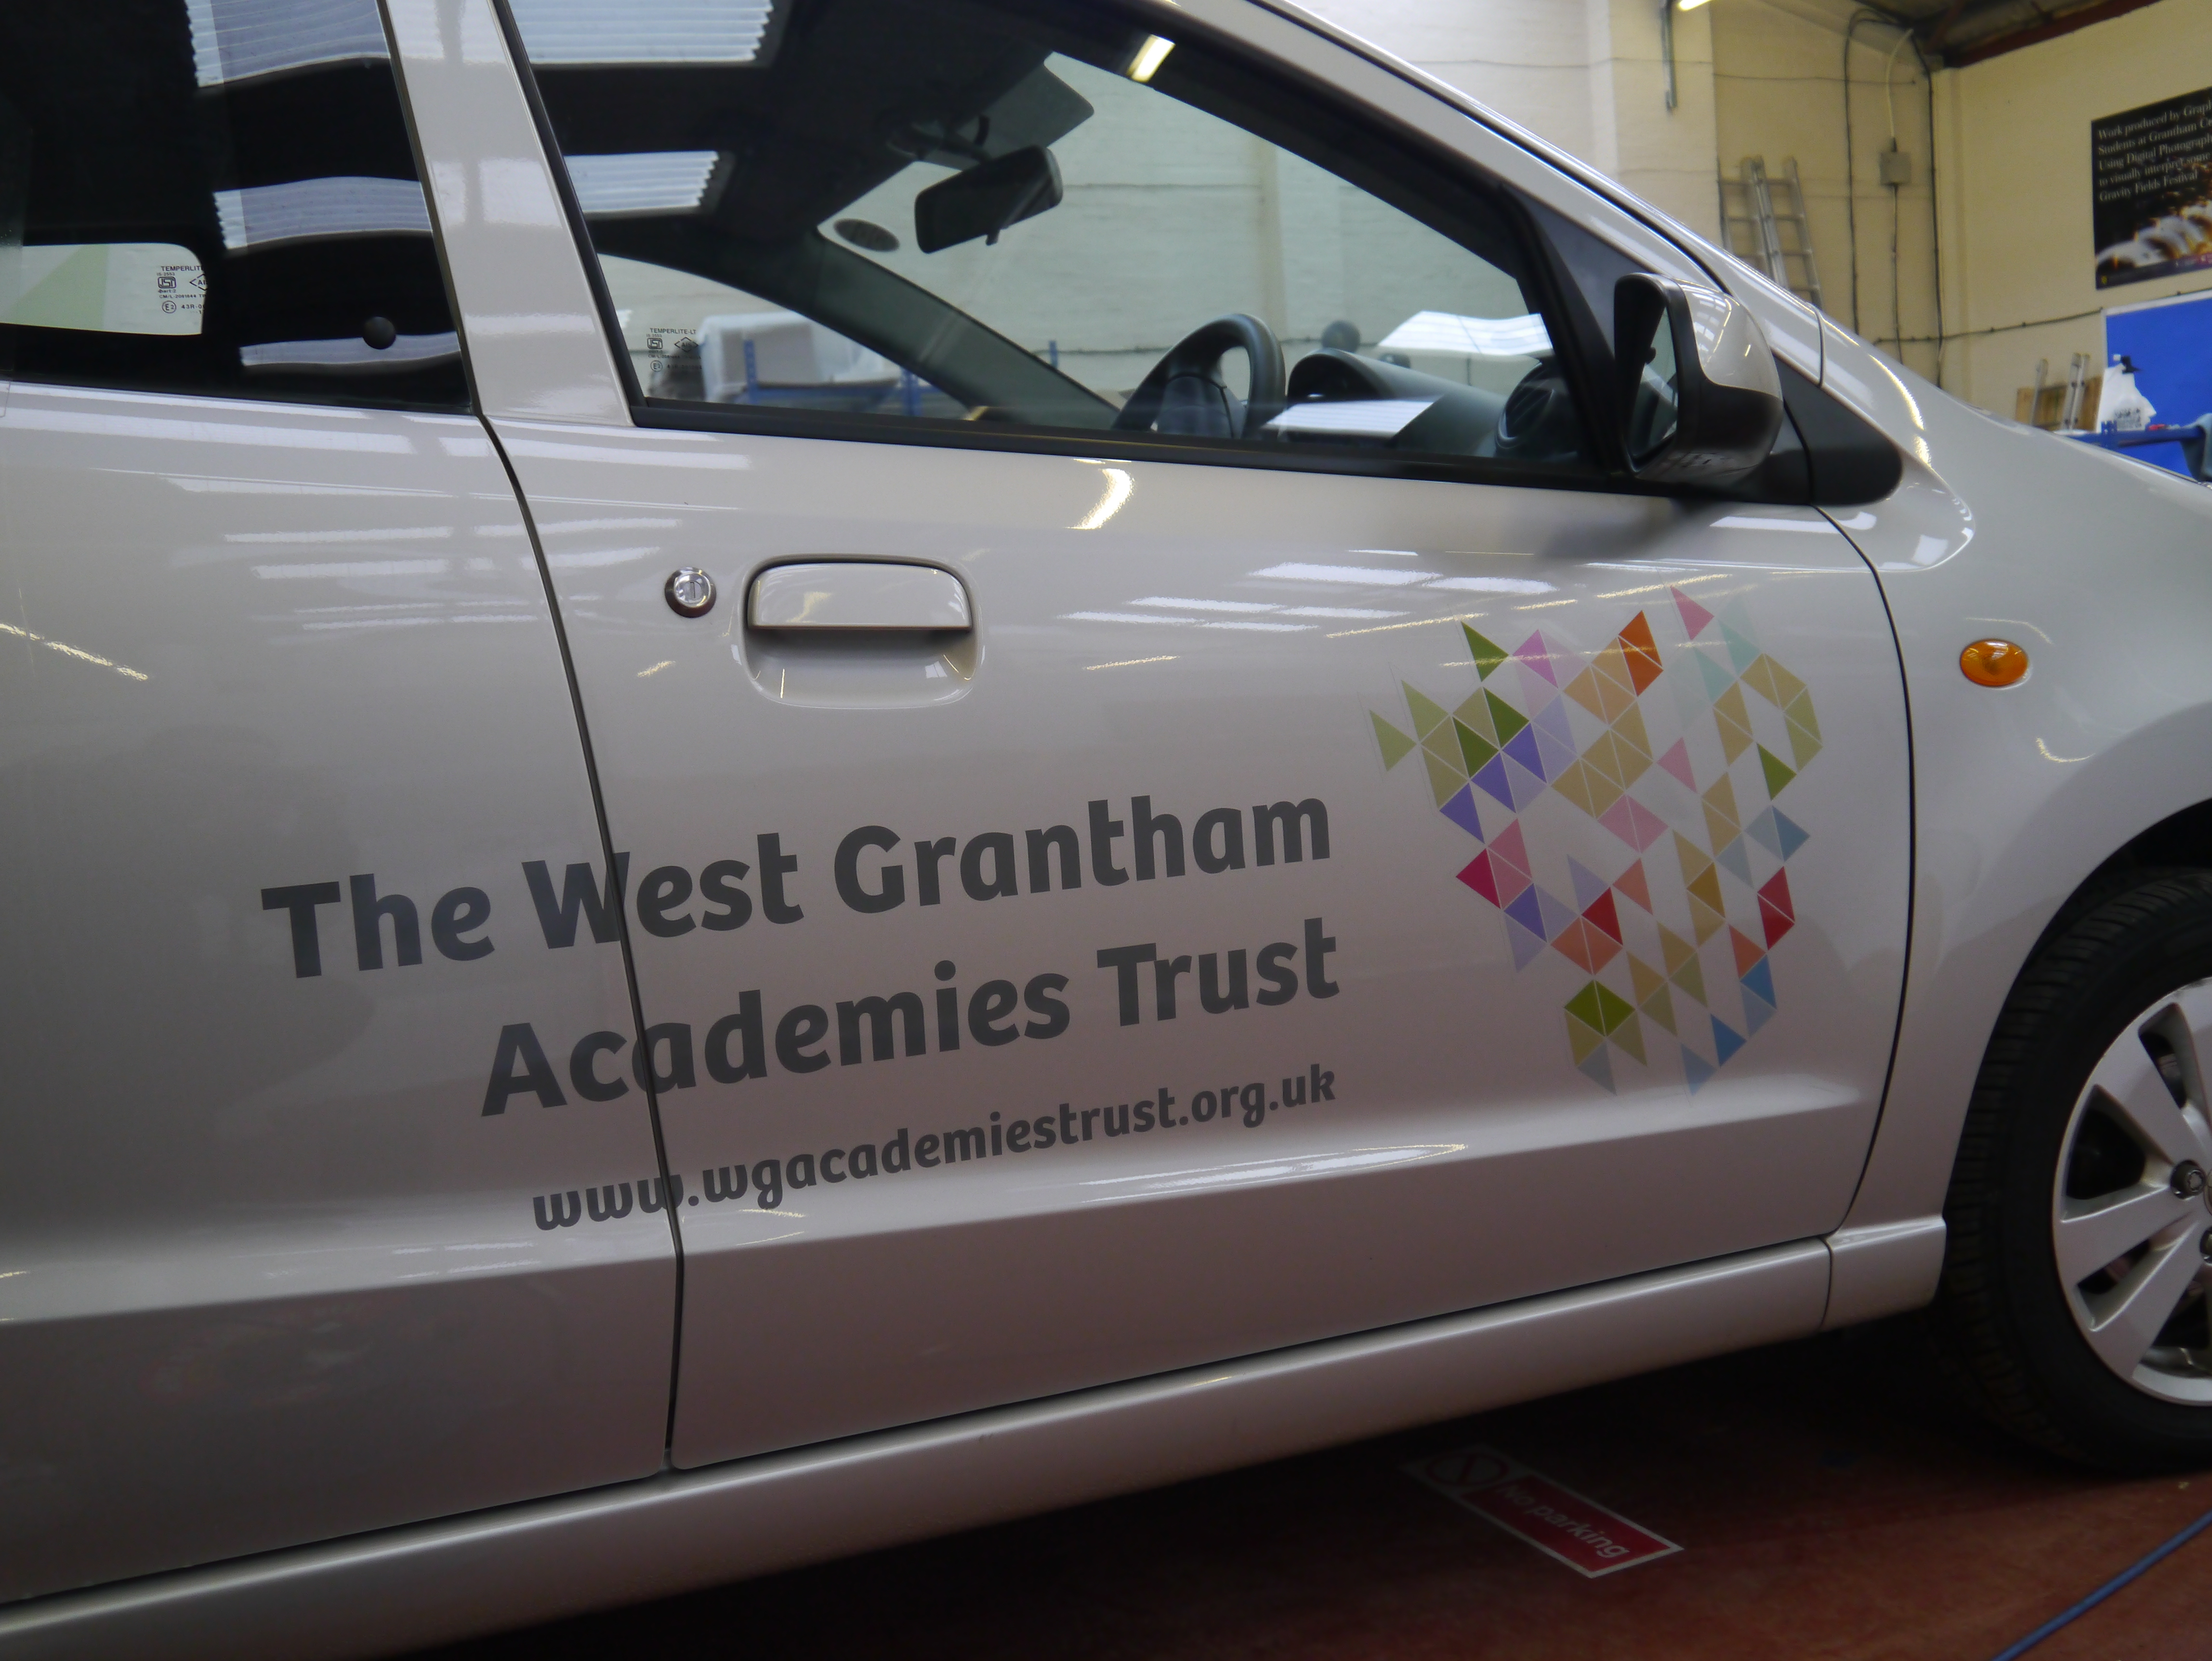 Vehicle Graphics for The West Grantham Academies Trust